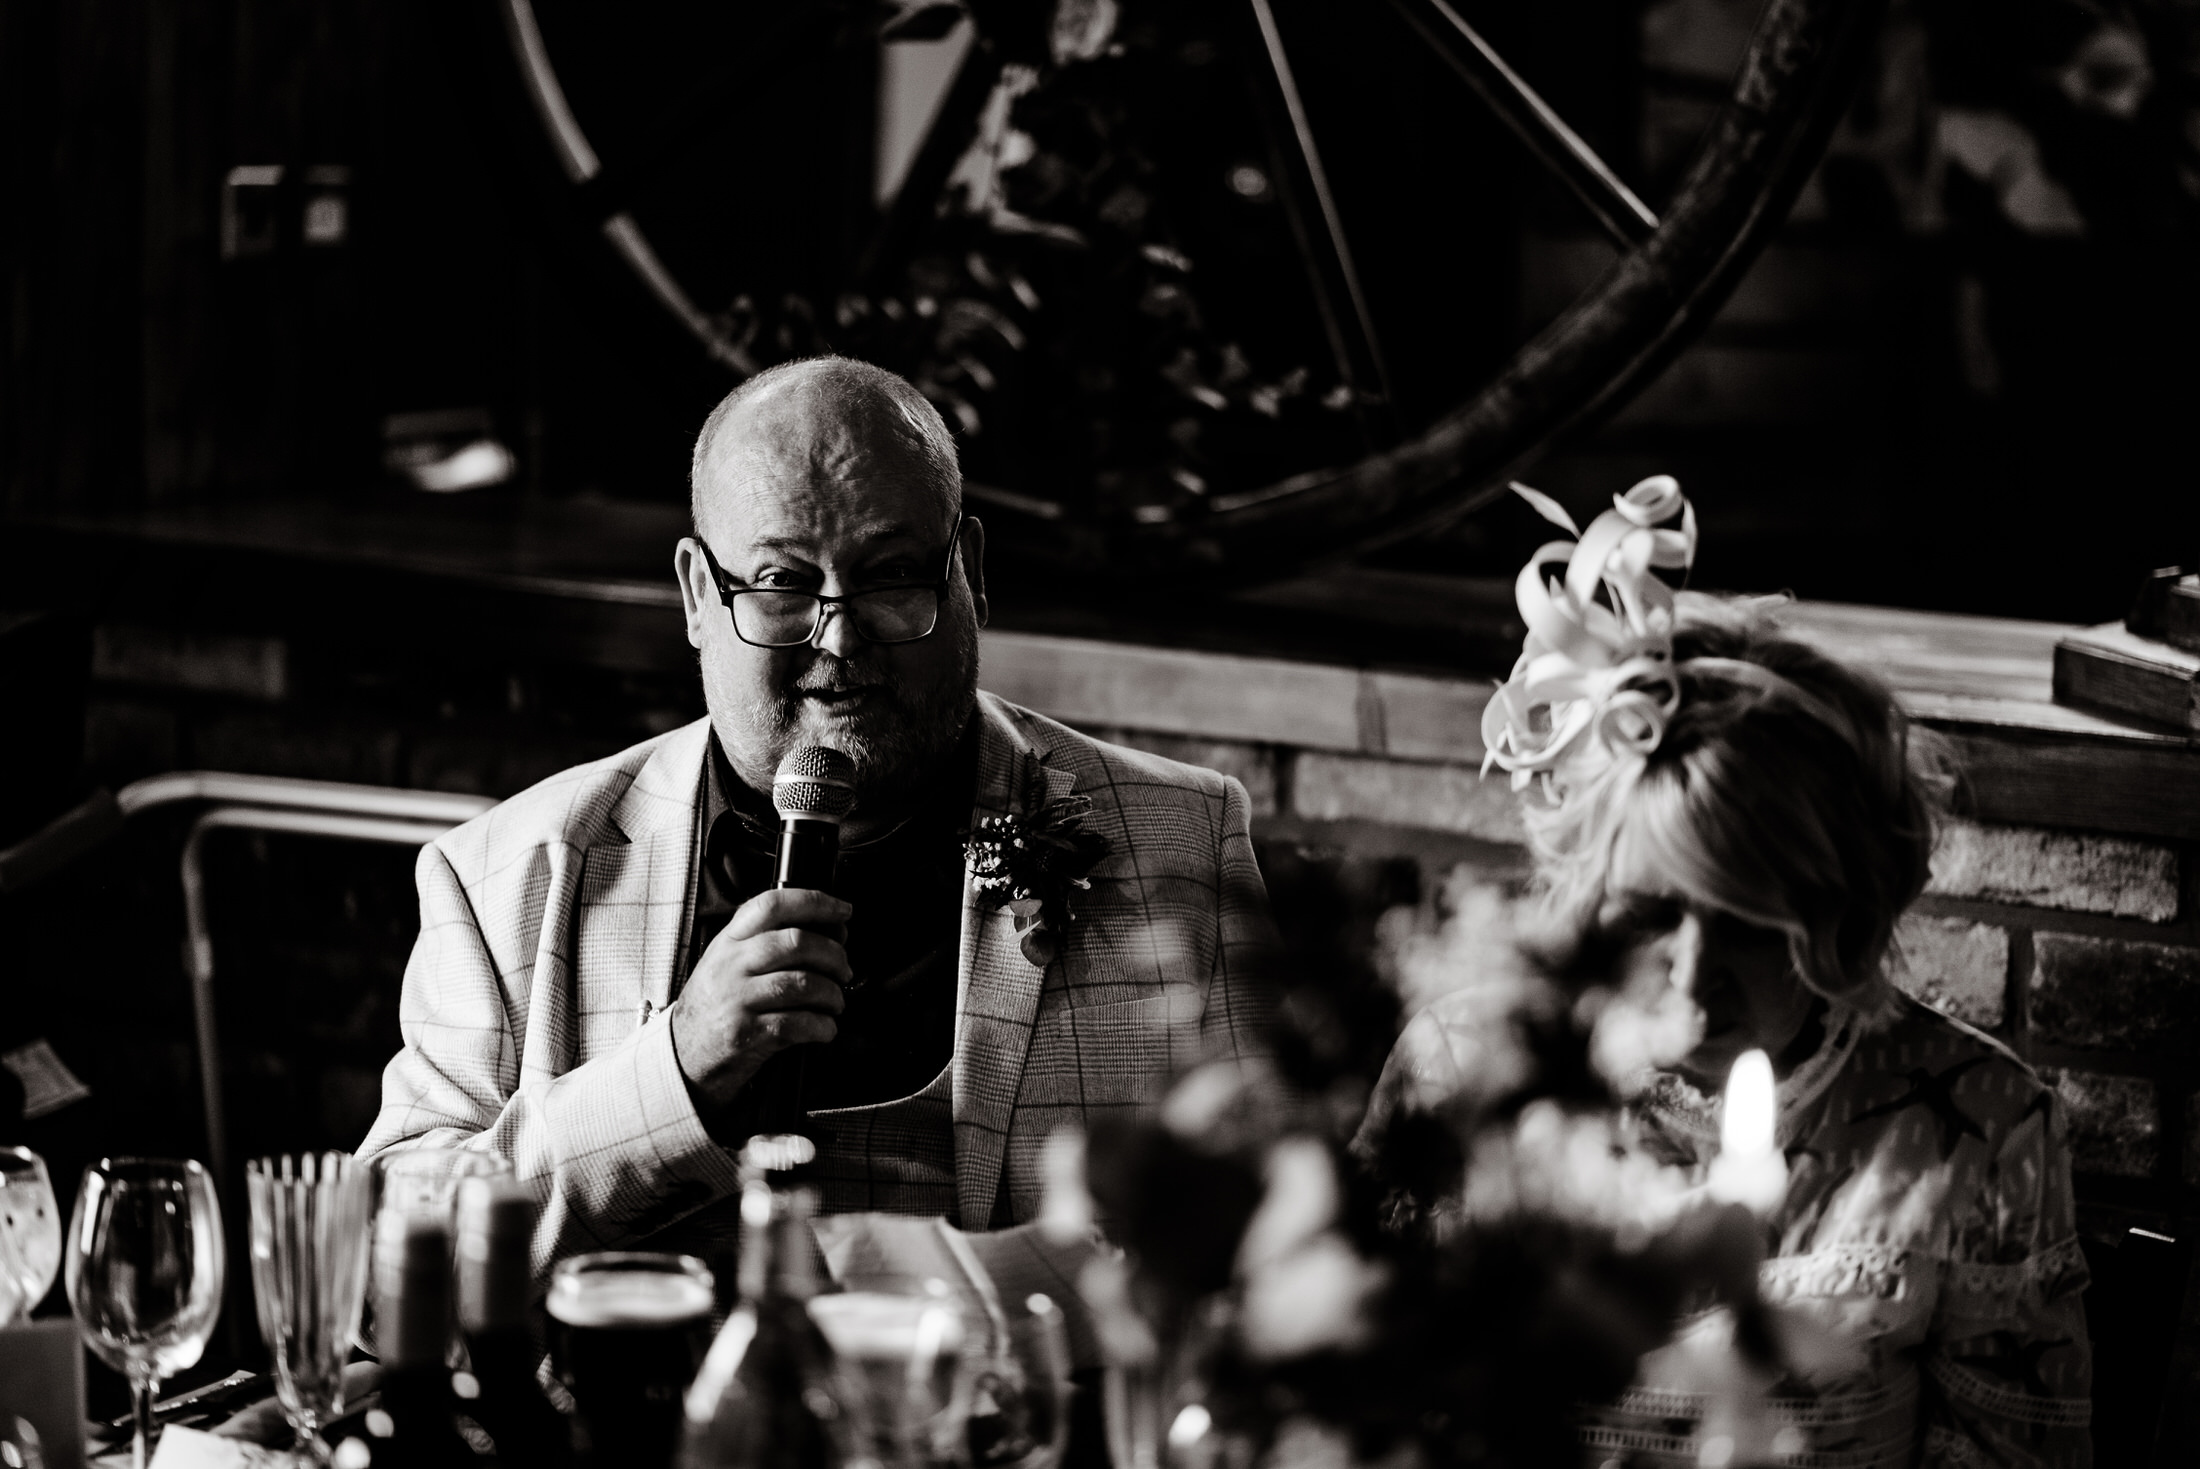 At a wedding reception, a man is passionately speaking into a microphone at a table in the picturesque Scrivelsby Walled Garden.